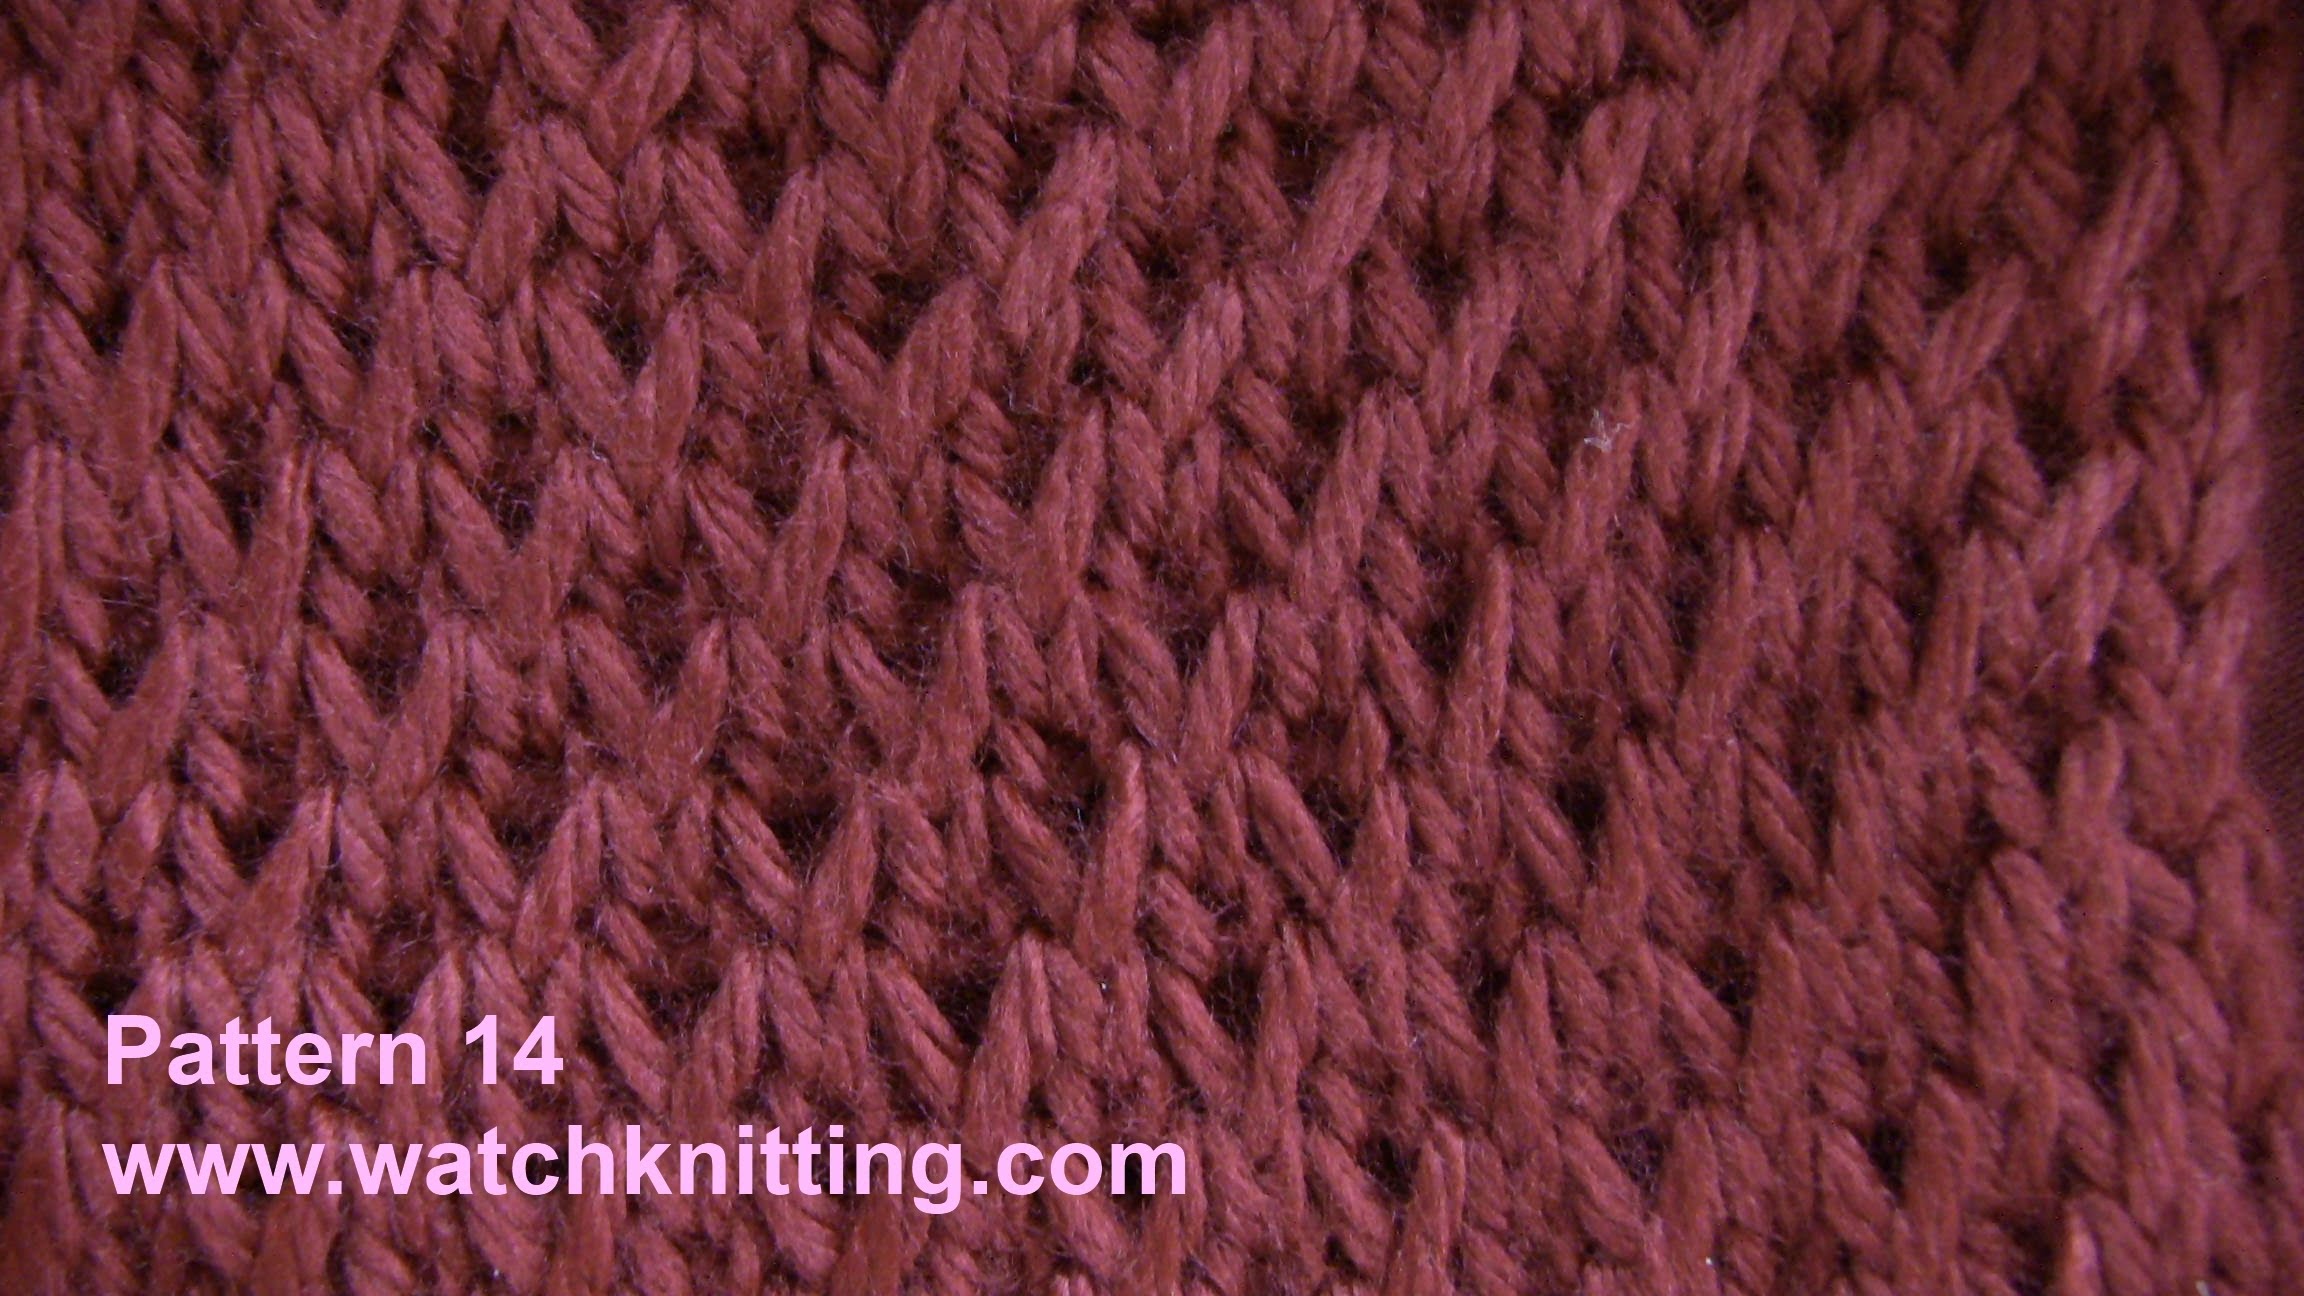 simple knitting patterns simulated brioche stitch - free knitting tutorial - watch knitting - pattern mkkczes